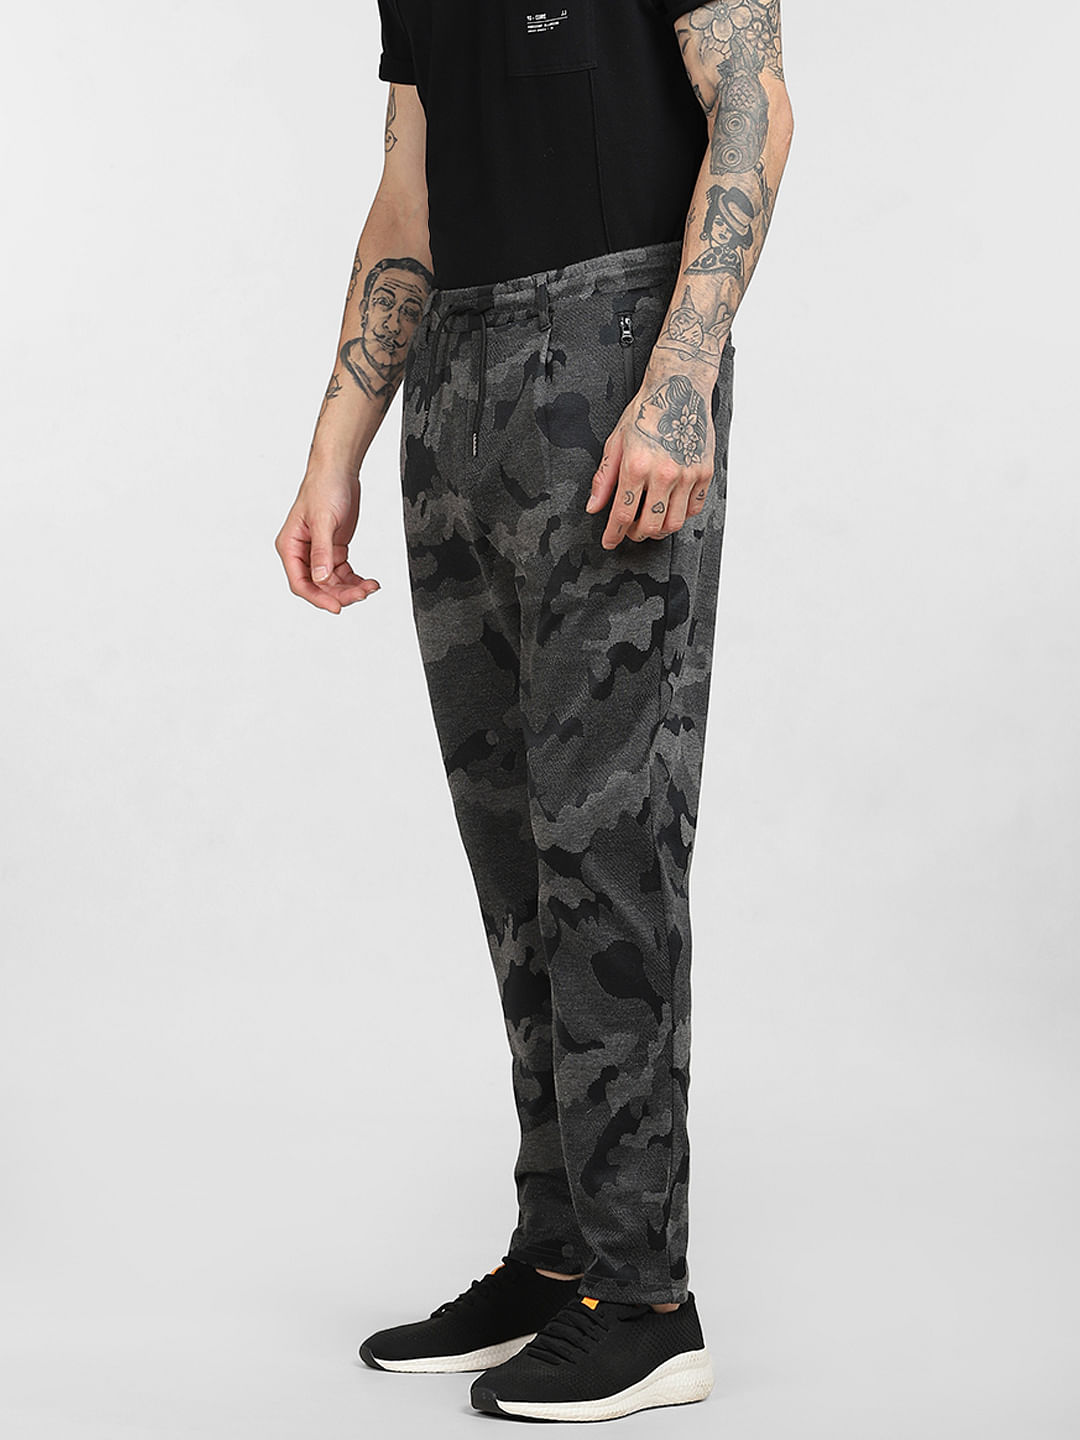 Buy online Olivegreen Camouflage Joggers Track Pant from Sports Wear for  Men by Aeropostale for 1079 at 57 off  2023 Limeroadcom